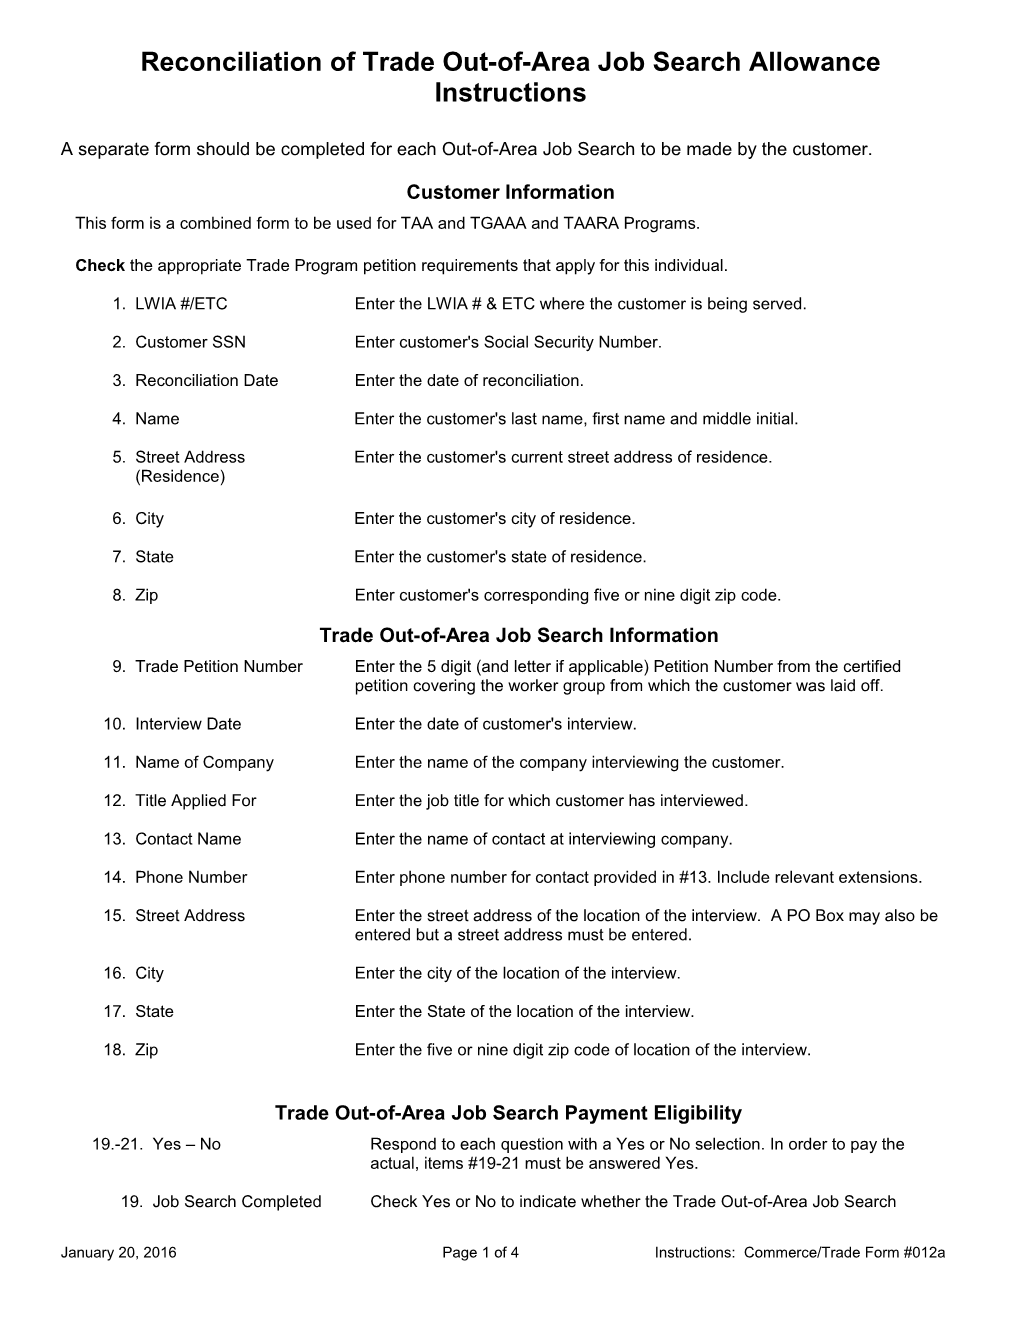 Form #012A Reconciliation Of Trade Out-Of-Area Job Search Allowance Instructions (MS Word) 3-01-14